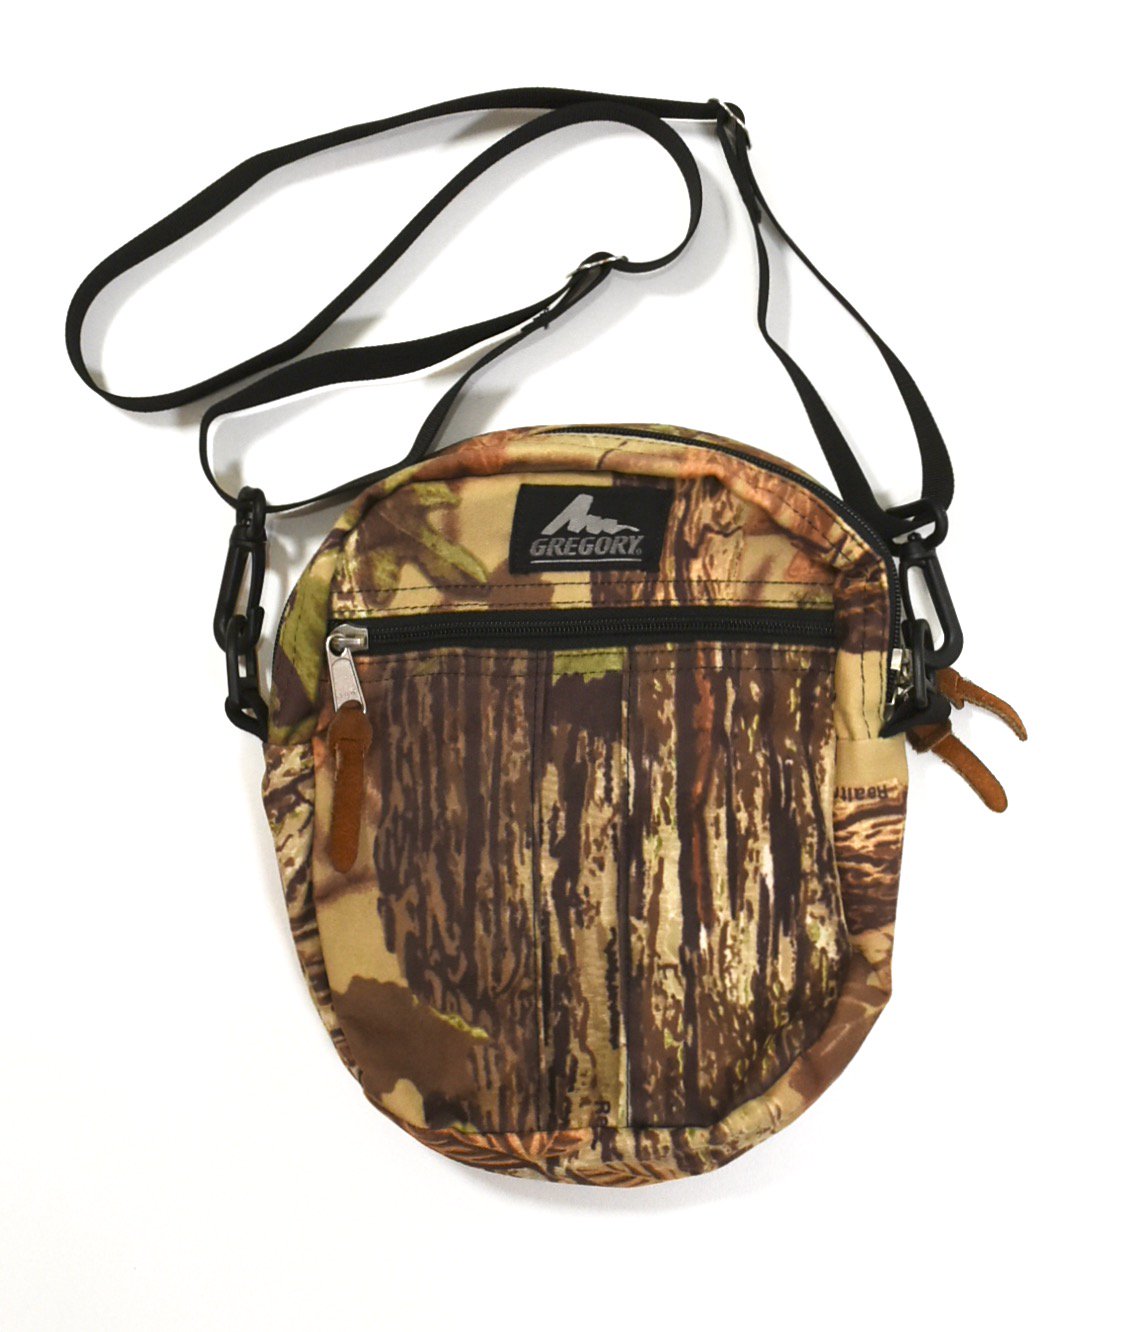 GREGORY С Quick pocket L MADE IN USA Realtree